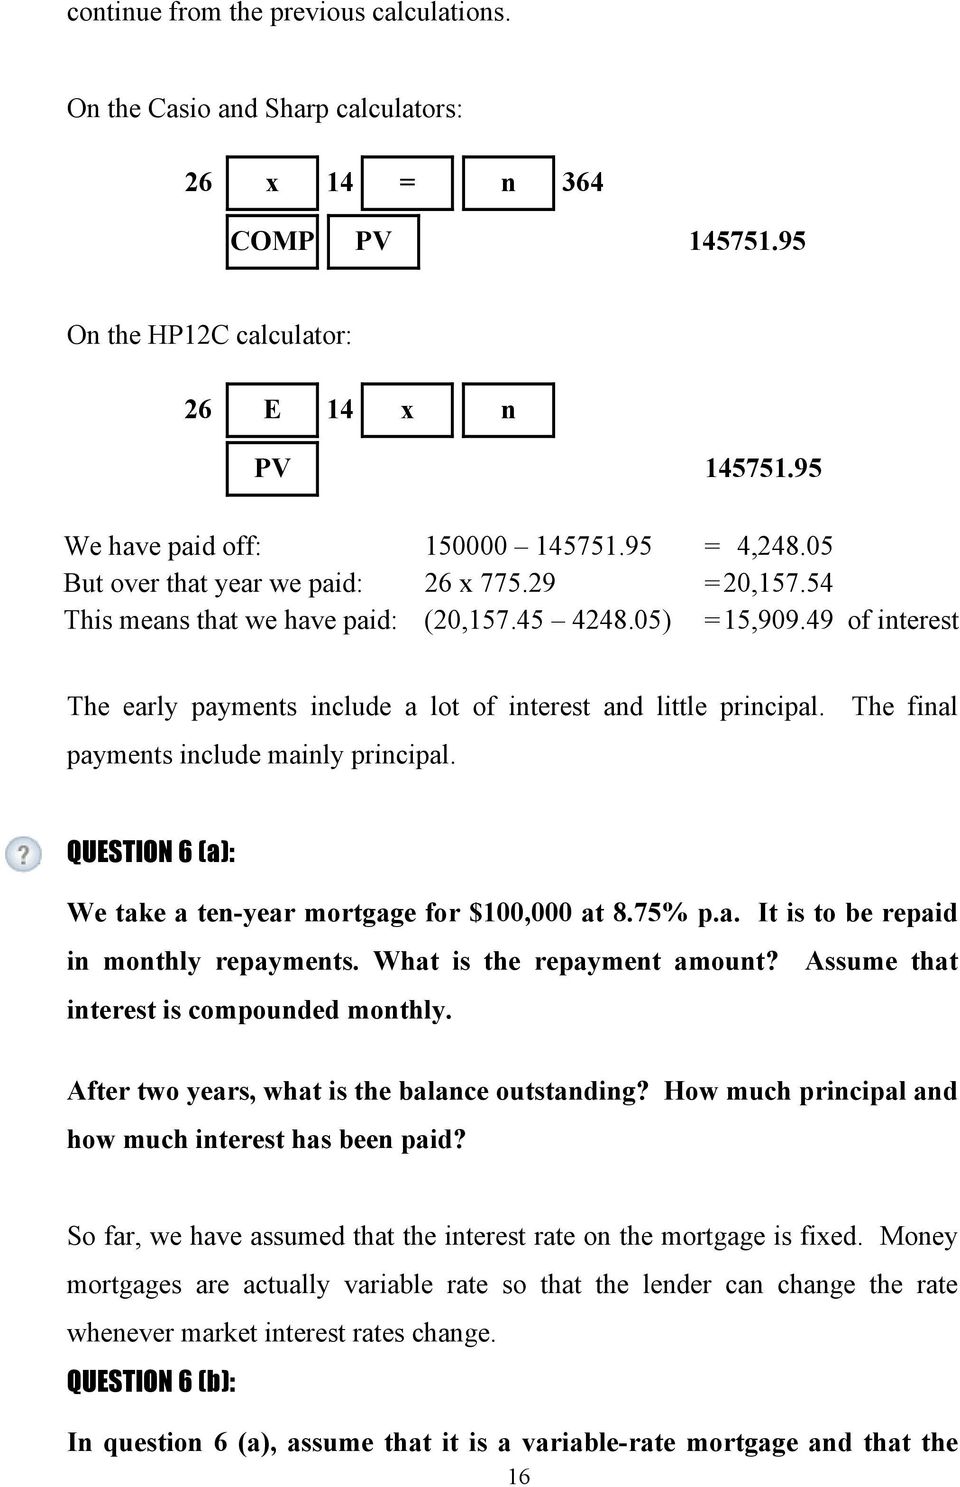 The final payments include mainly principal. QUESTION 6 (a): We take a ten-year mortgage for $100,000 at 8.75% p.a. It is to be repaid in monthly repayments. What is the repayment amount?